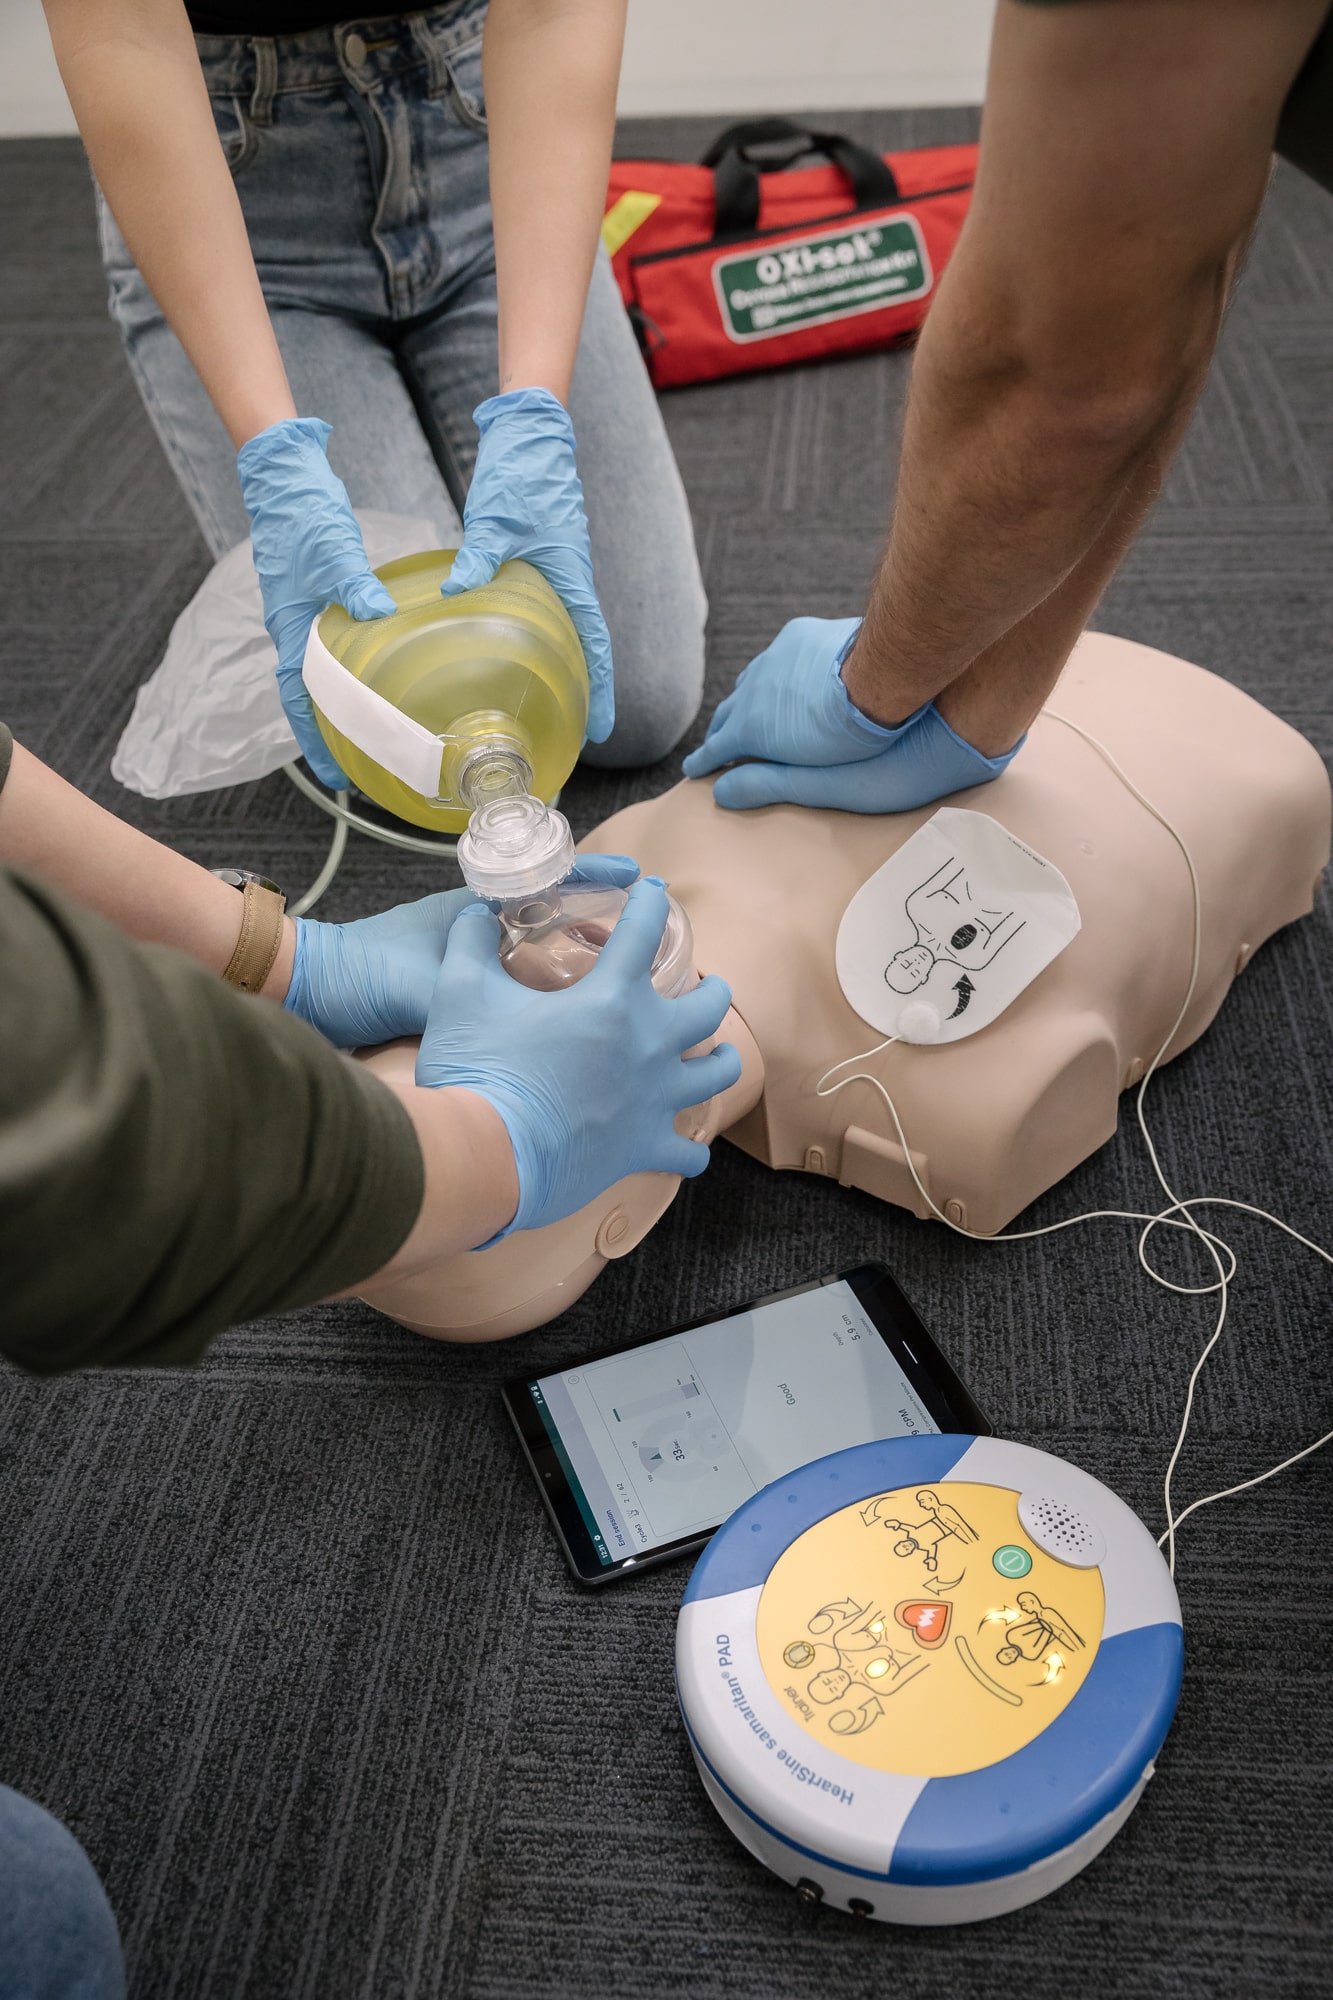 Advanced first aid and CPR on a mannequin